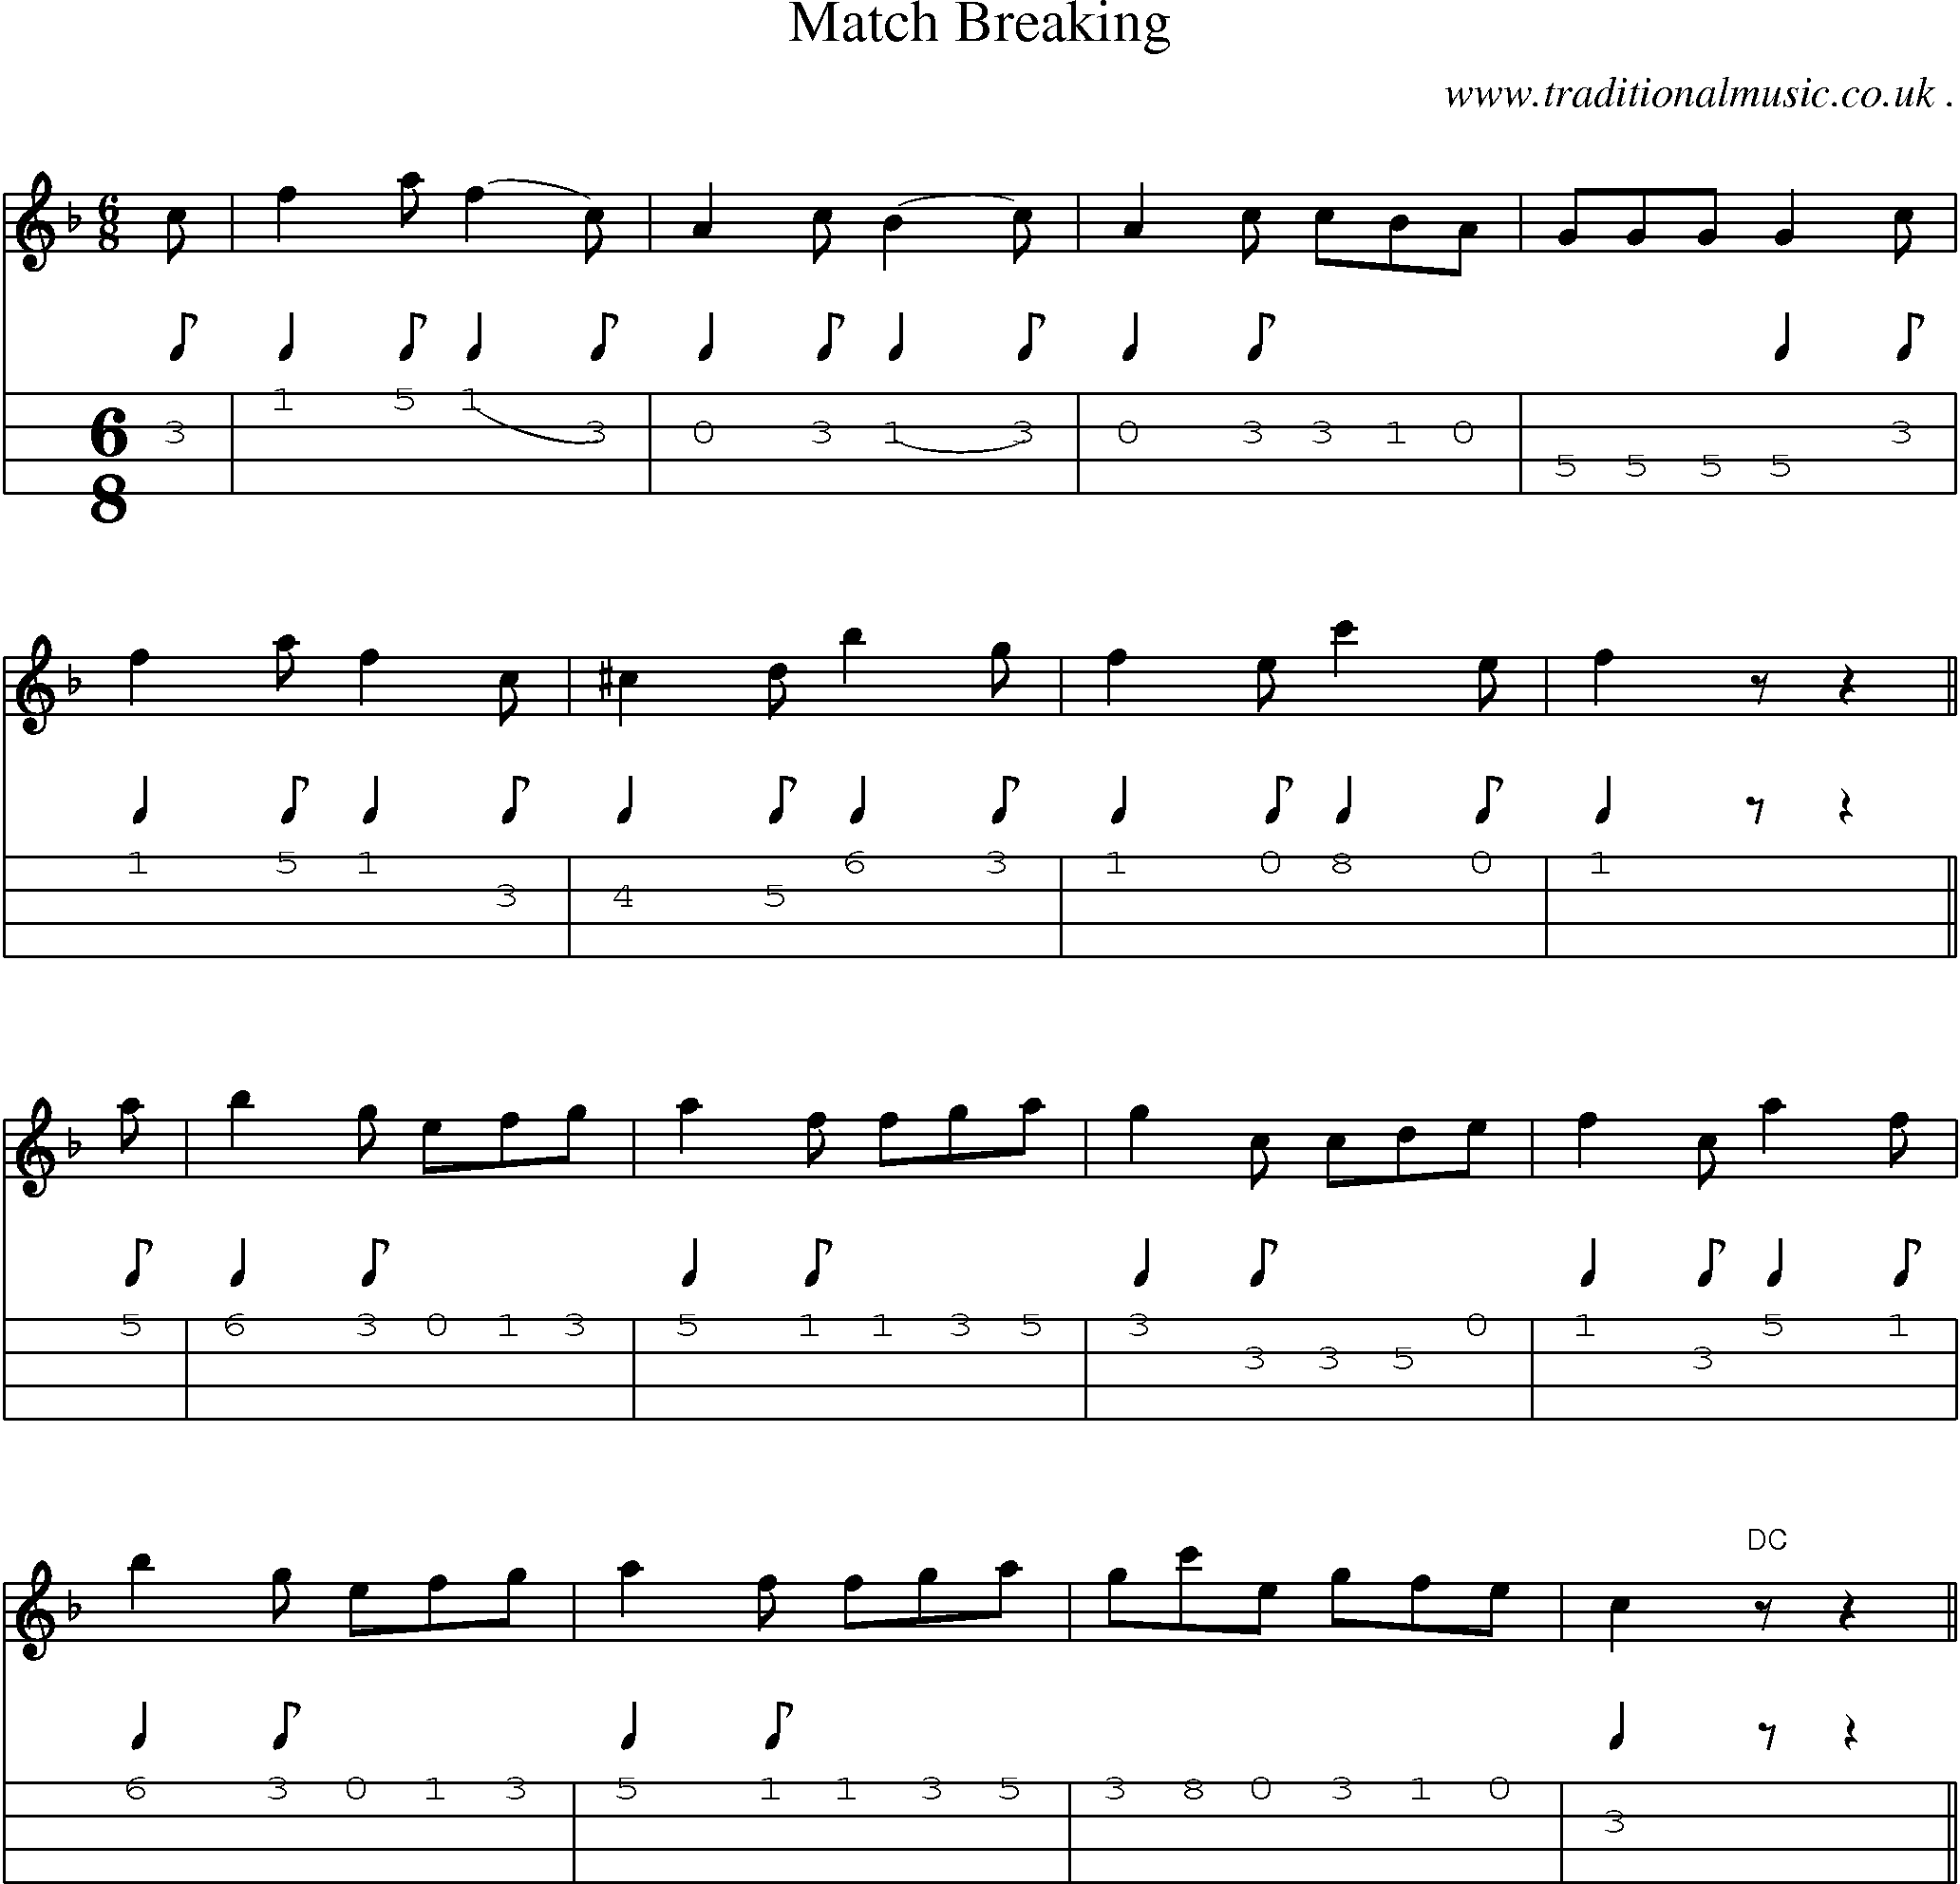 Sheet-Music and Mandolin Tabs for Match Breaking